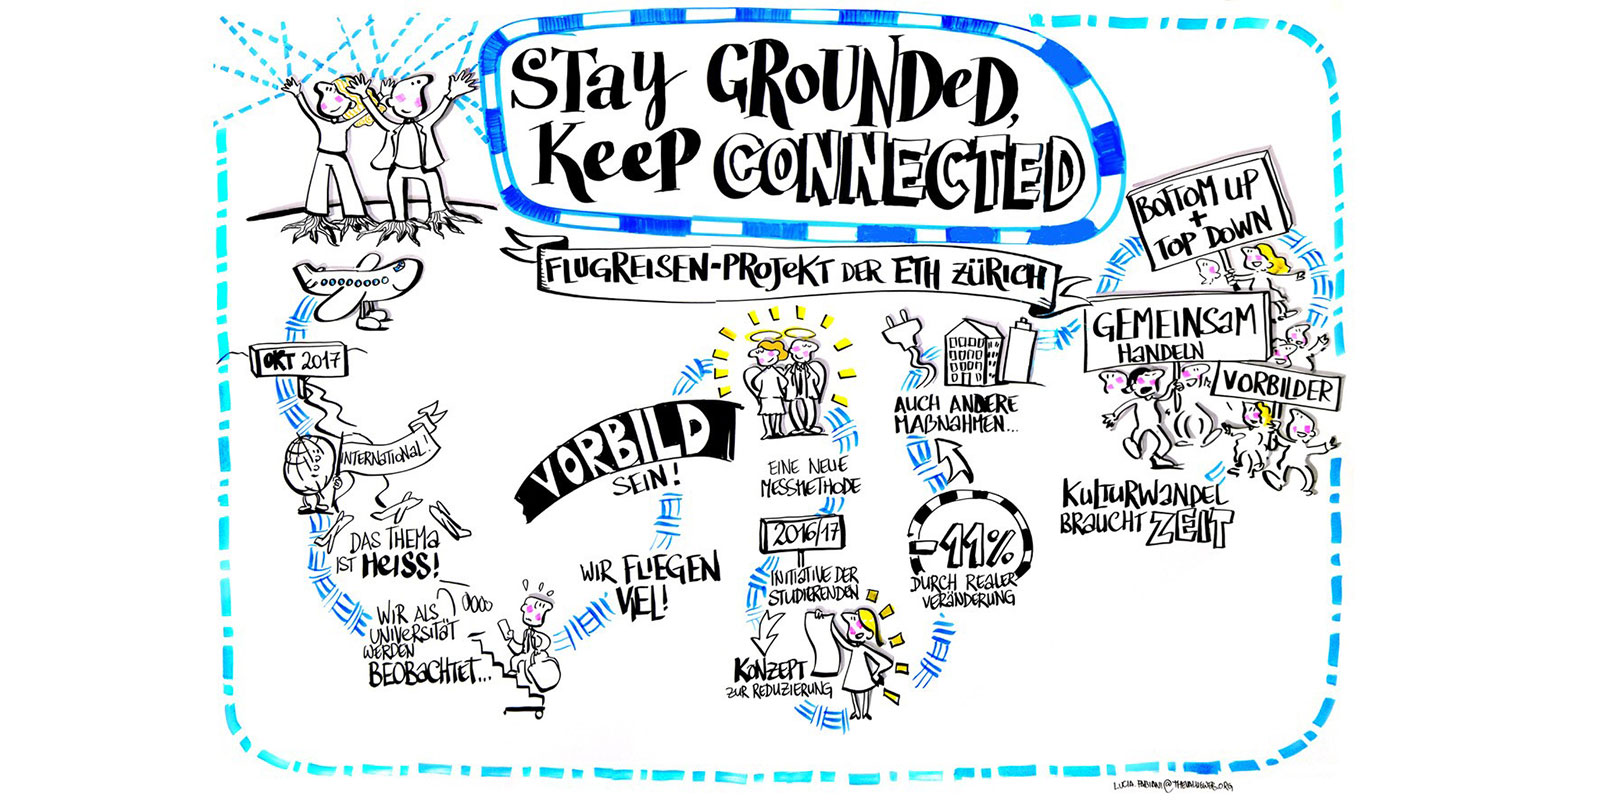 Enlarged view: „Stay grounded-keep connected“ – Forum on ETH Zurich’s Air Travel ProjectETH Zurich has launched a project to reduce flight-related CO2 emissions: Keywords of an internal discussion. (Graphics: Lucia Fabiani /The Value Web)